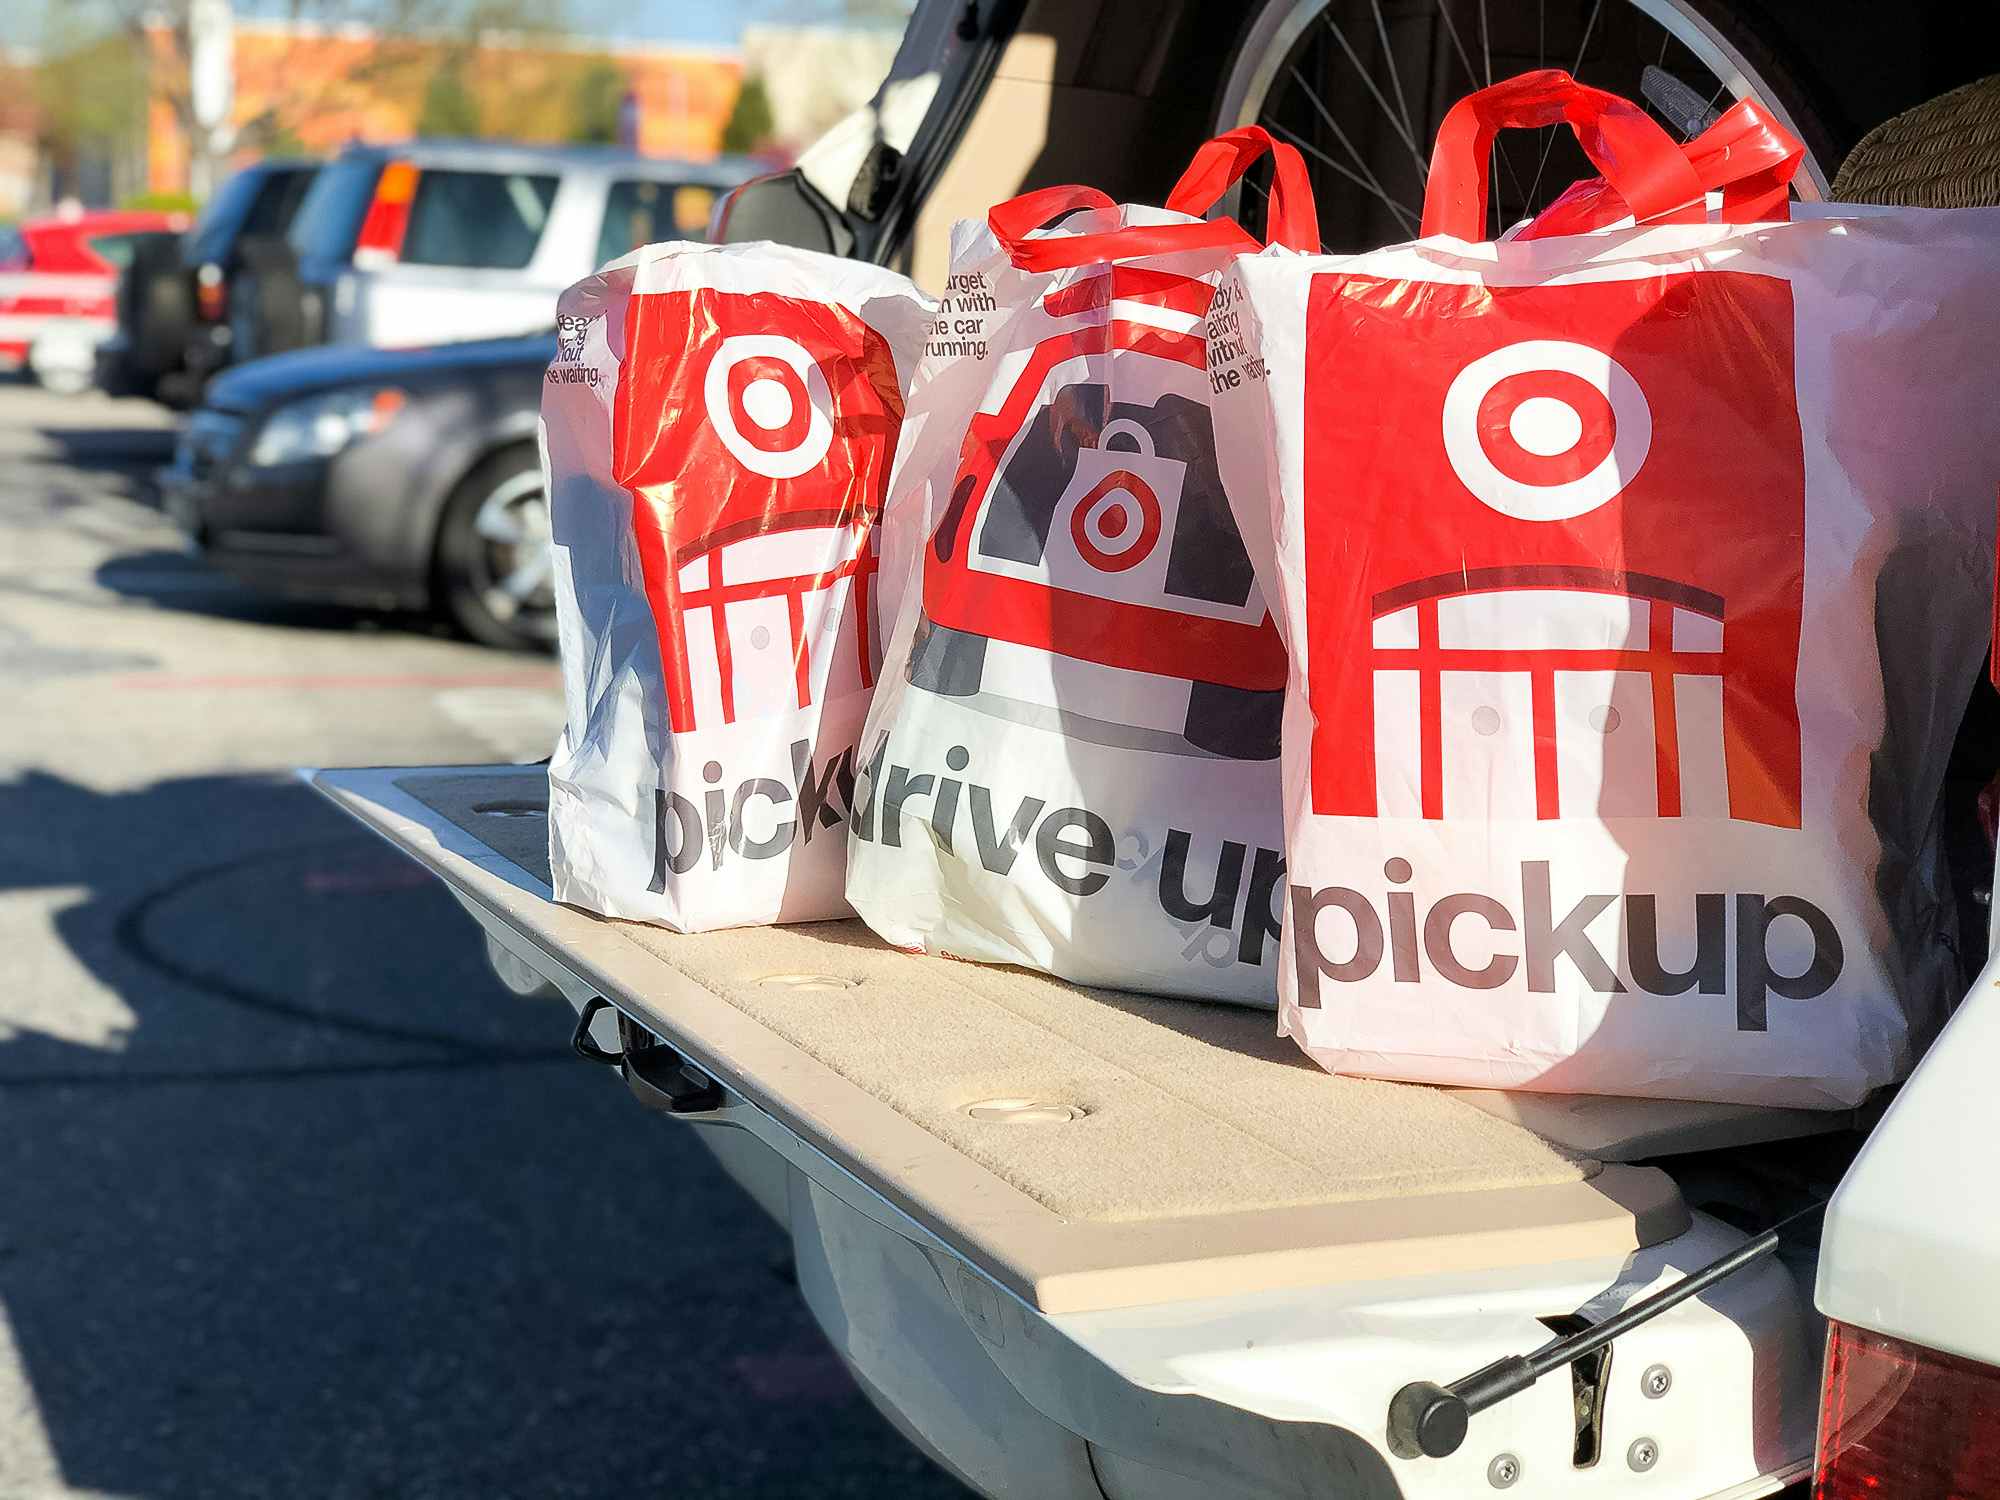 Target drive up and pickup bags full of items sitting in the trunk of a car with the door open